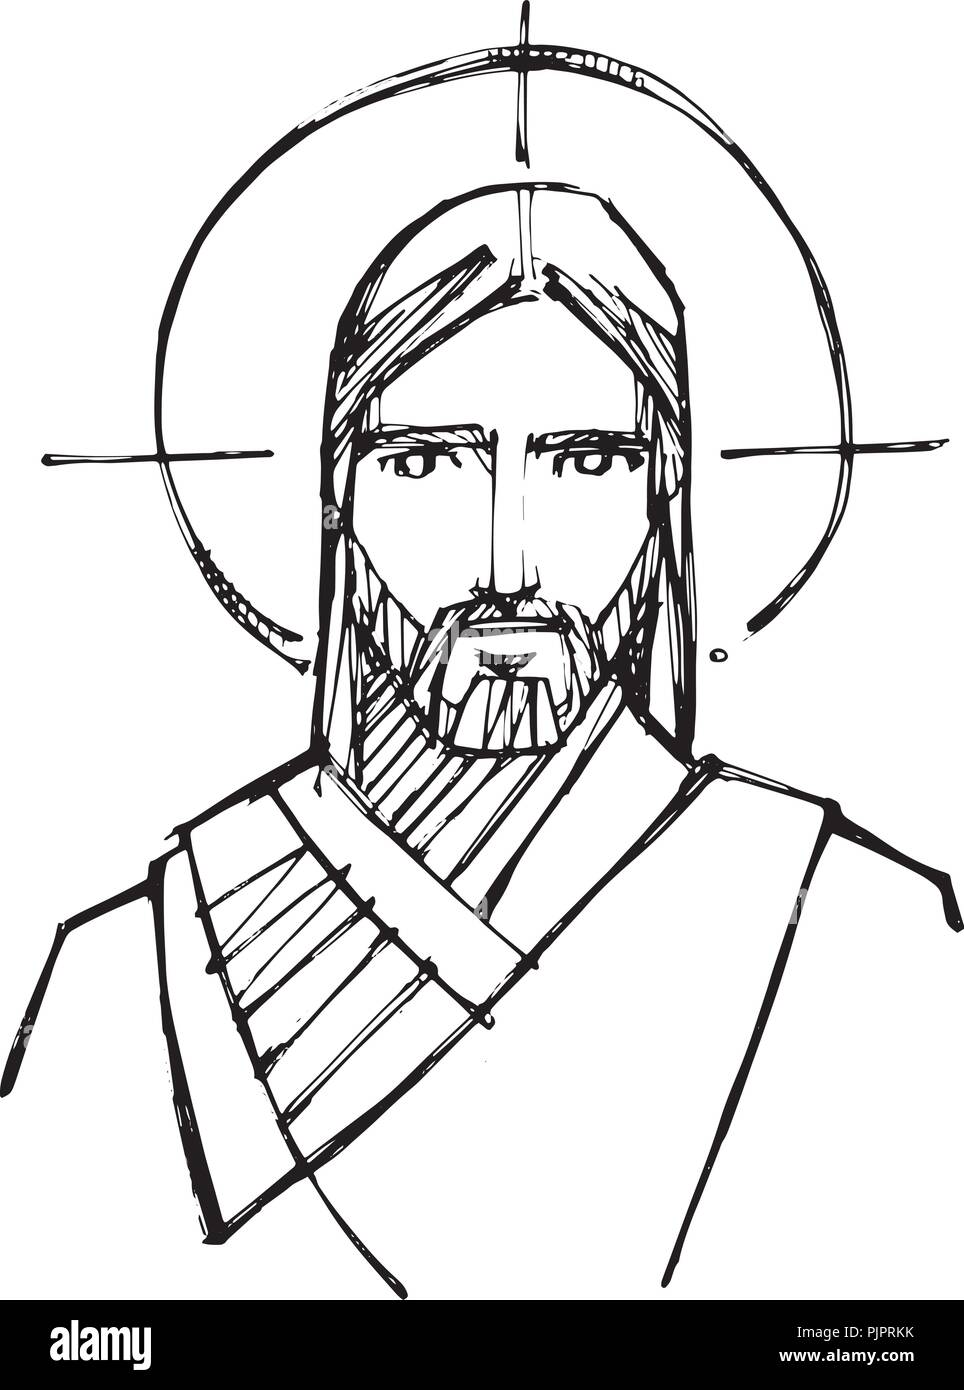 Hand drawn vector illustration or drawing of Jesus Christ face Stock ...